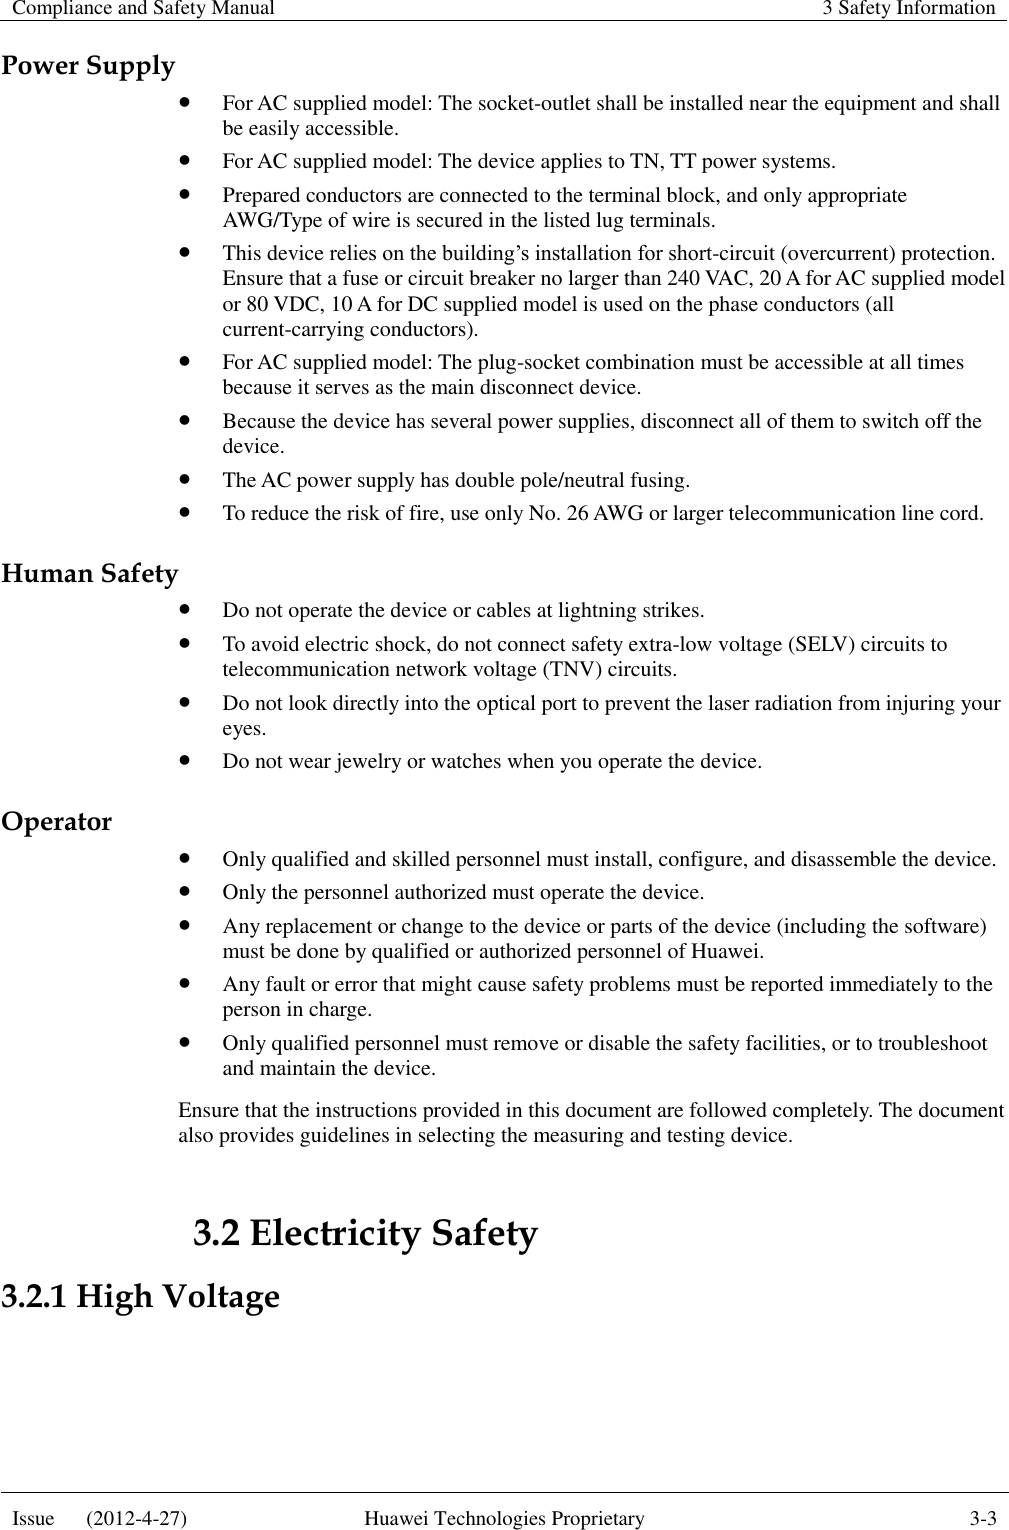 Compliance and Safety Manual 3 Safety Information  Issue      (2012-4-27) Huawei Technologies Proprietary 3-3  Power Supply  For AC supplied model: The socket-outlet shall be installed near the equipment and shall be easily accessible.  For AC supplied model: The device applies to TN, TT power systems.  Prepared conductors are connected to the terminal block, and only appropriate AWG/Type of wire is secured in the listed lug terminals.  This device relies on the building’s installation for short-circuit (overcurrent) protection. Ensure that a fuse or circuit breaker no larger than 240 VAC, 20 A for AC supplied model or 80 VDC, 10 A for DC supplied model is used on the phase conductors (all current-carrying conductors).  For AC supplied model: The plug-socket combination must be accessible at all times because it serves as the main disconnect device.  Because the device has several power supplies, disconnect all of them to switch off the device.  The AC power supply has double pole/neutral fusing.  To reduce the risk of fire, use only No. 26 AWG or larger telecommunication line cord. Human Safety  Do not operate the device or cables at lightning strikes.  To avoid electric shock, do not connect safety extra-low voltage (SELV) circuits to telecommunication network voltage (TNV) circuits.  Do not look directly into the optical port to prevent the laser radiation from injuring your eyes.  Do not wear jewelry or watches when you operate the device. Operator  Only qualified and skilled personnel must install, configure, and disassemble the device.  Only the personnel authorized must operate the device.  Any replacement or change to the device or parts of the device (including the software) must be done by qualified or authorized personnel of Huawei.  Any fault or error that might cause safety problems must be reported immediately to the person in charge.  Only qualified personnel must remove or disable the safety facilities, or to troubleshoot and maintain the device. Ensure that the instructions provided in this document are followed completely. The document also provides guidelines in selecting the measuring and testing device. 3.2 Electricity Safety 3.2.1 High Voltage  